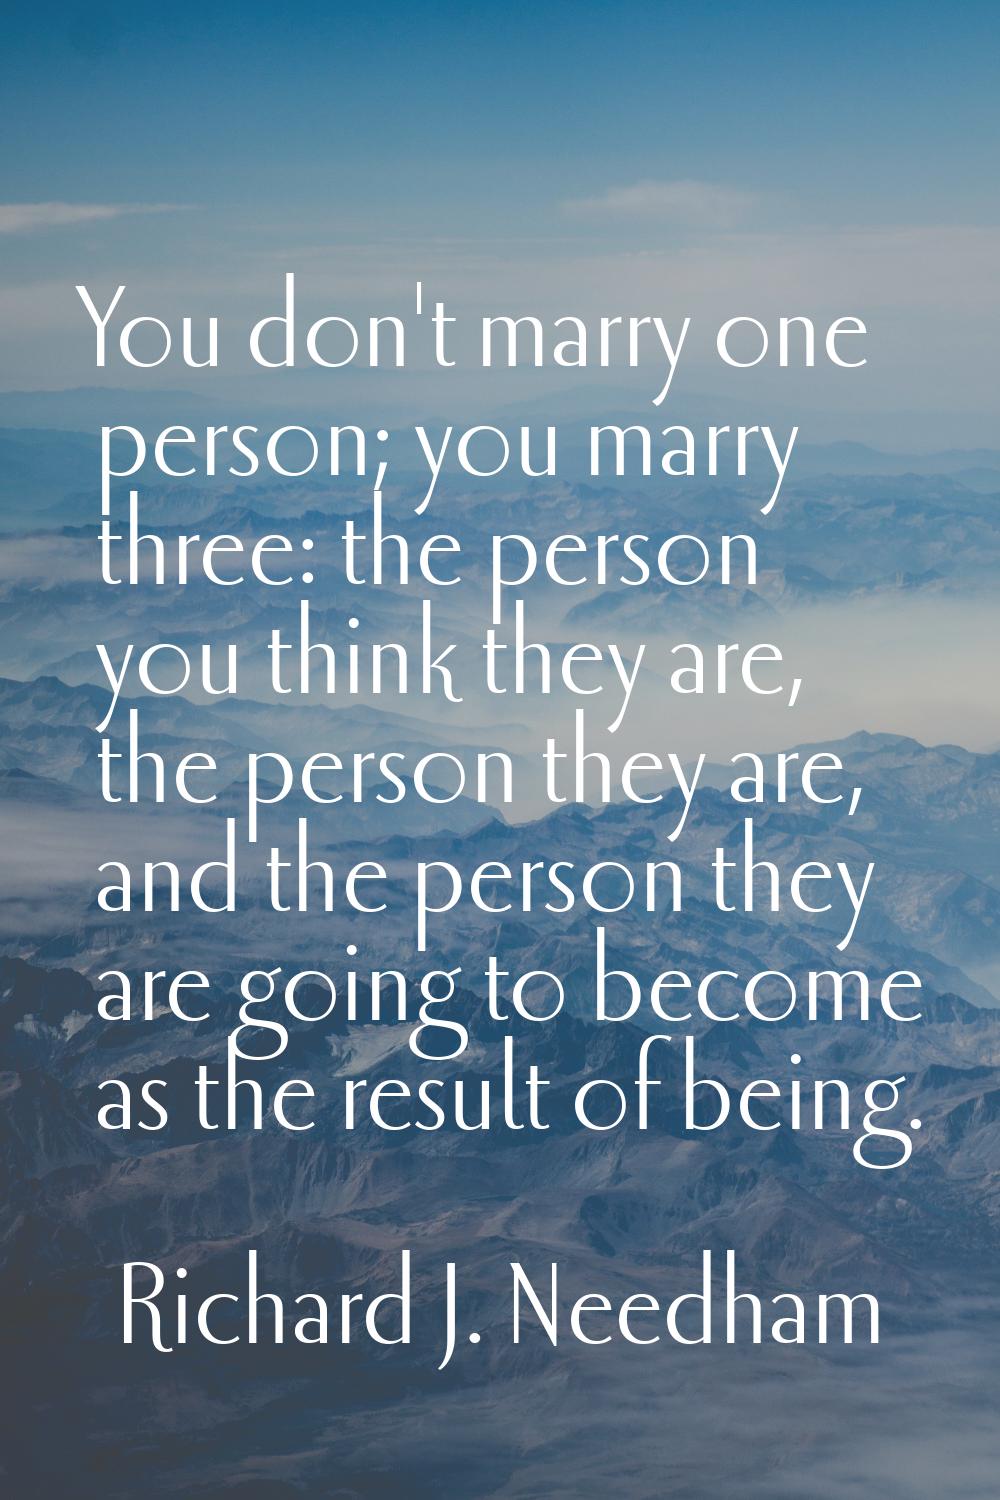 You don't marry one person; you marry three: the person you think they are, the person they are, an